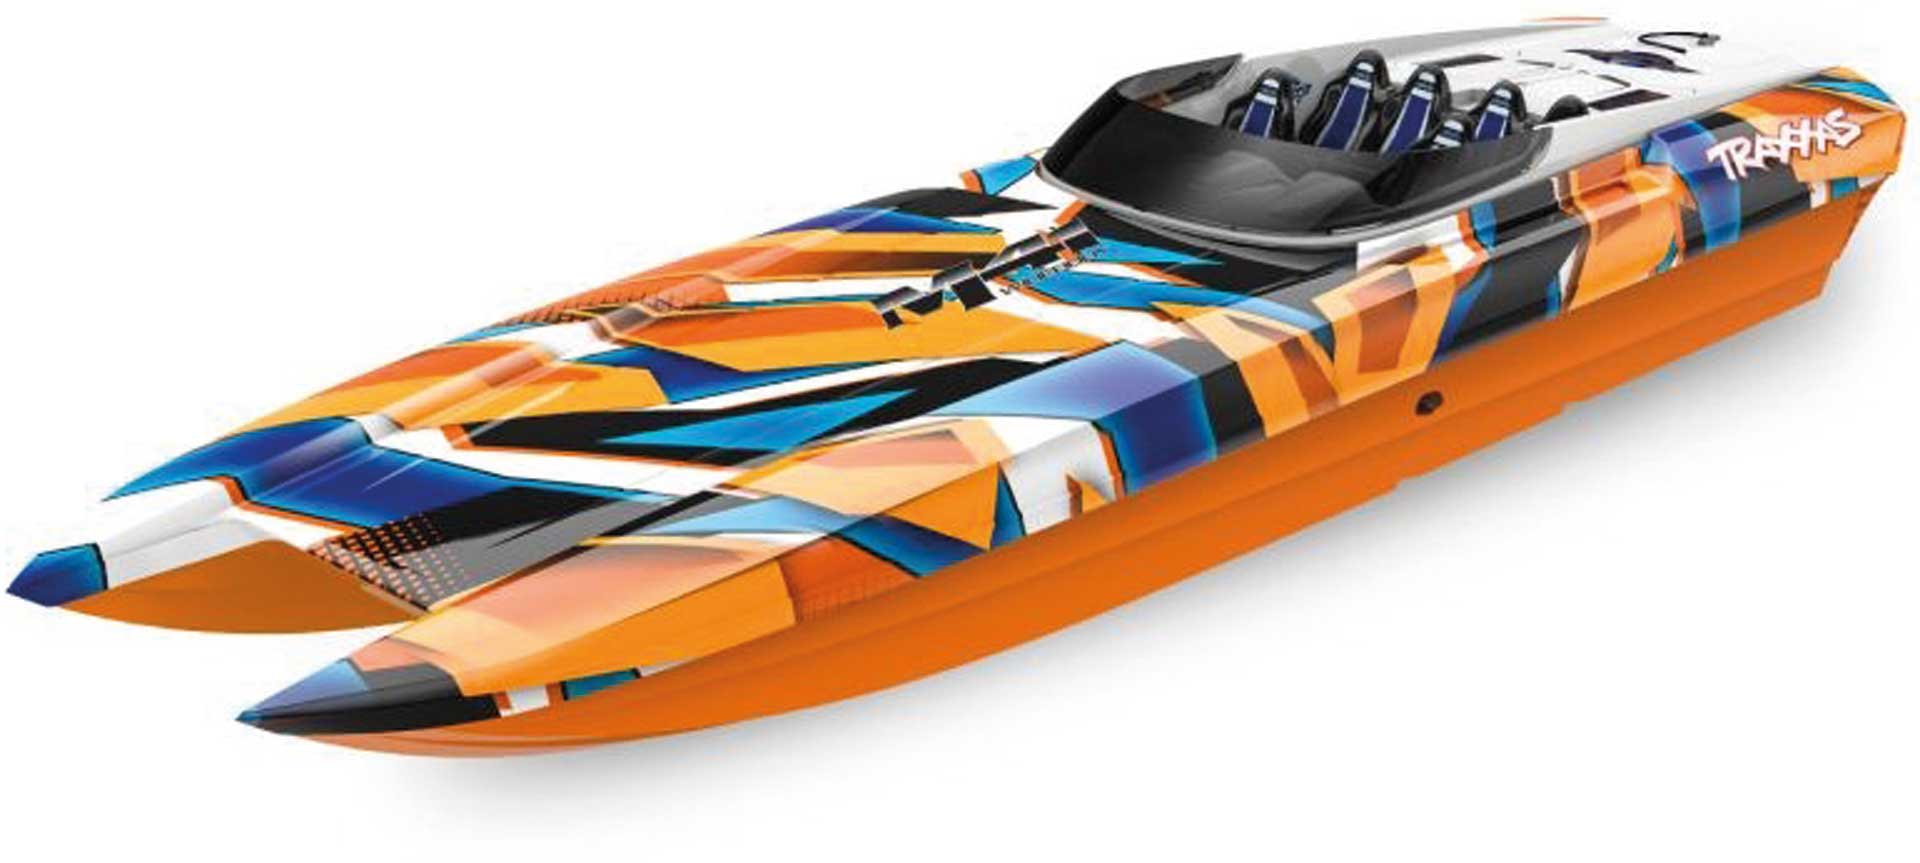 TRAXXAS DCB M41 ORANGE 40 INCH WITHOUT BATTERY/CHARGER BL CATAMARAN RACING BOAT BRUSHLESS